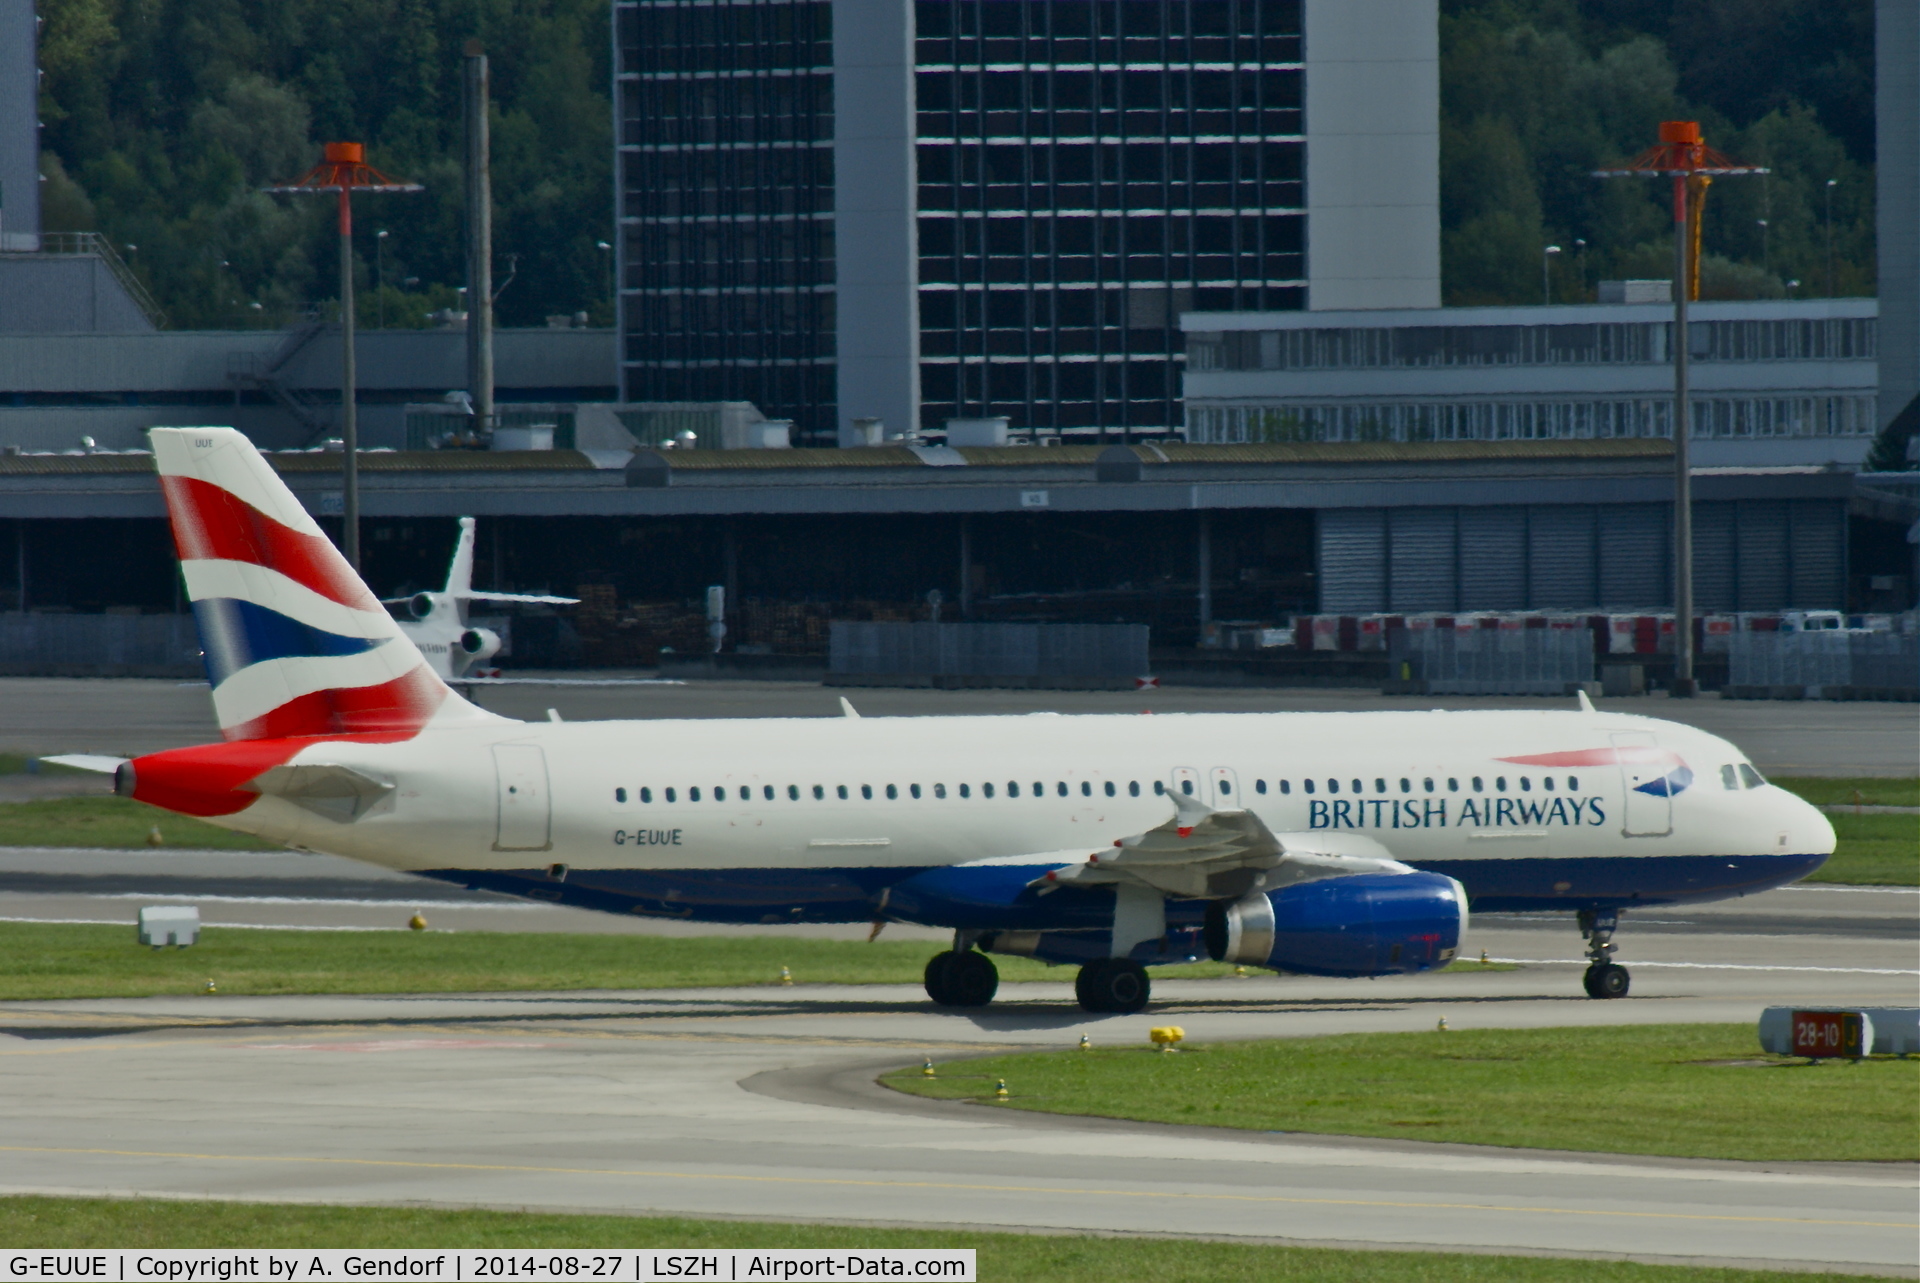 G-EUUE, 2002 Airbus A320-232 C/N 1782, British Airways, is here taxiing to the gate at Zürich-Kloten(LSZH)